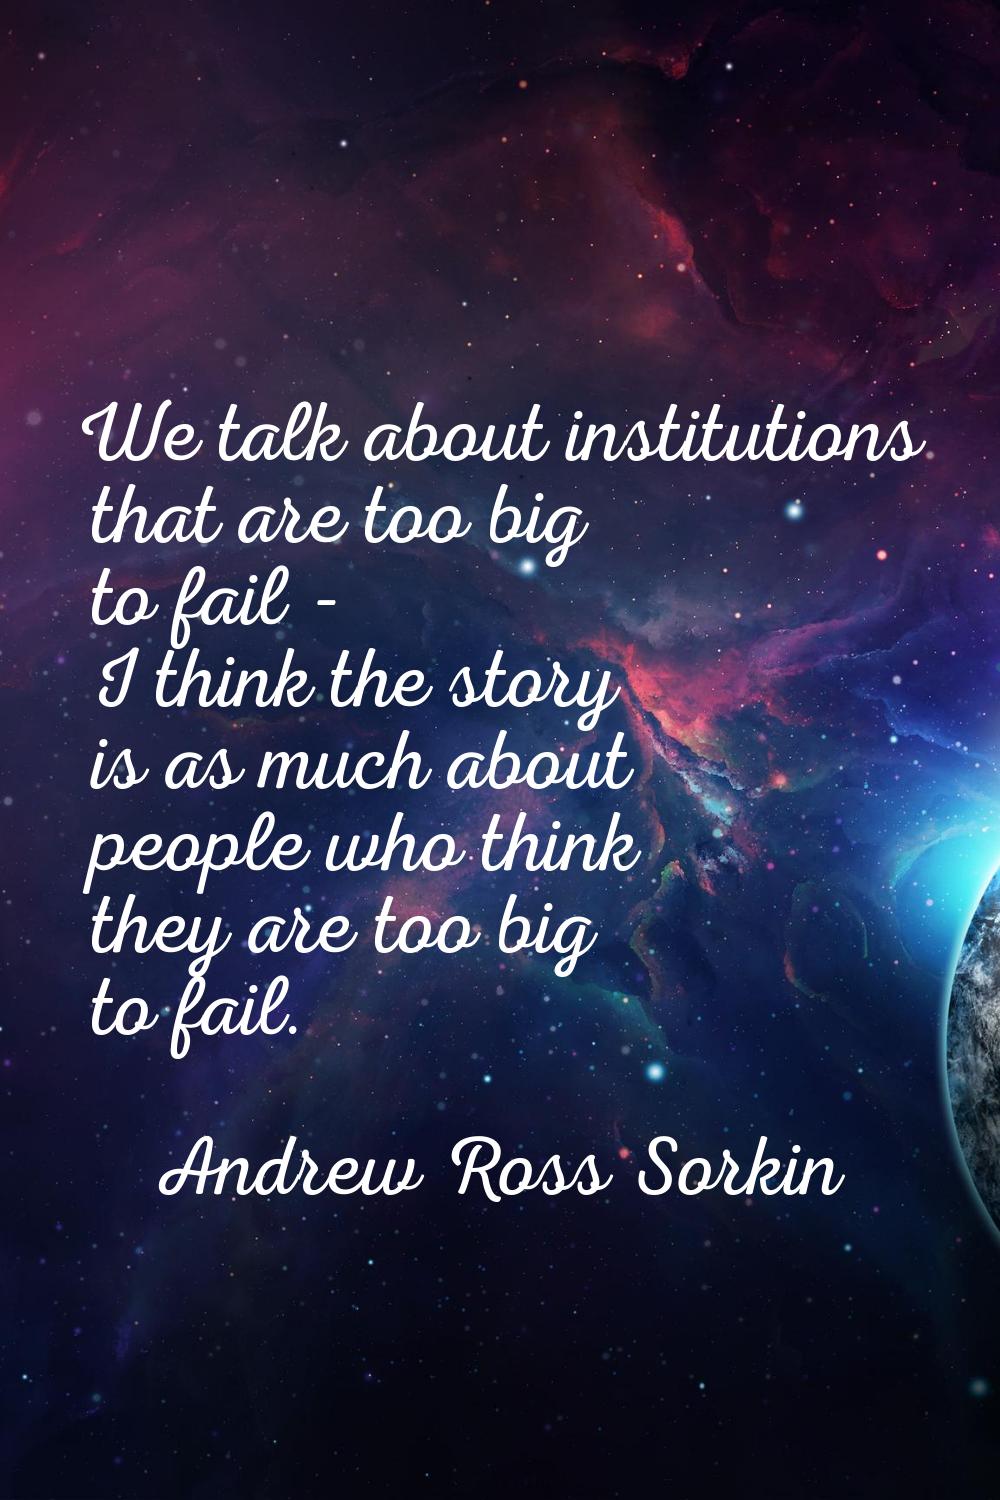 We talk about institutions that are too big to fail - I think the story is as much about people who